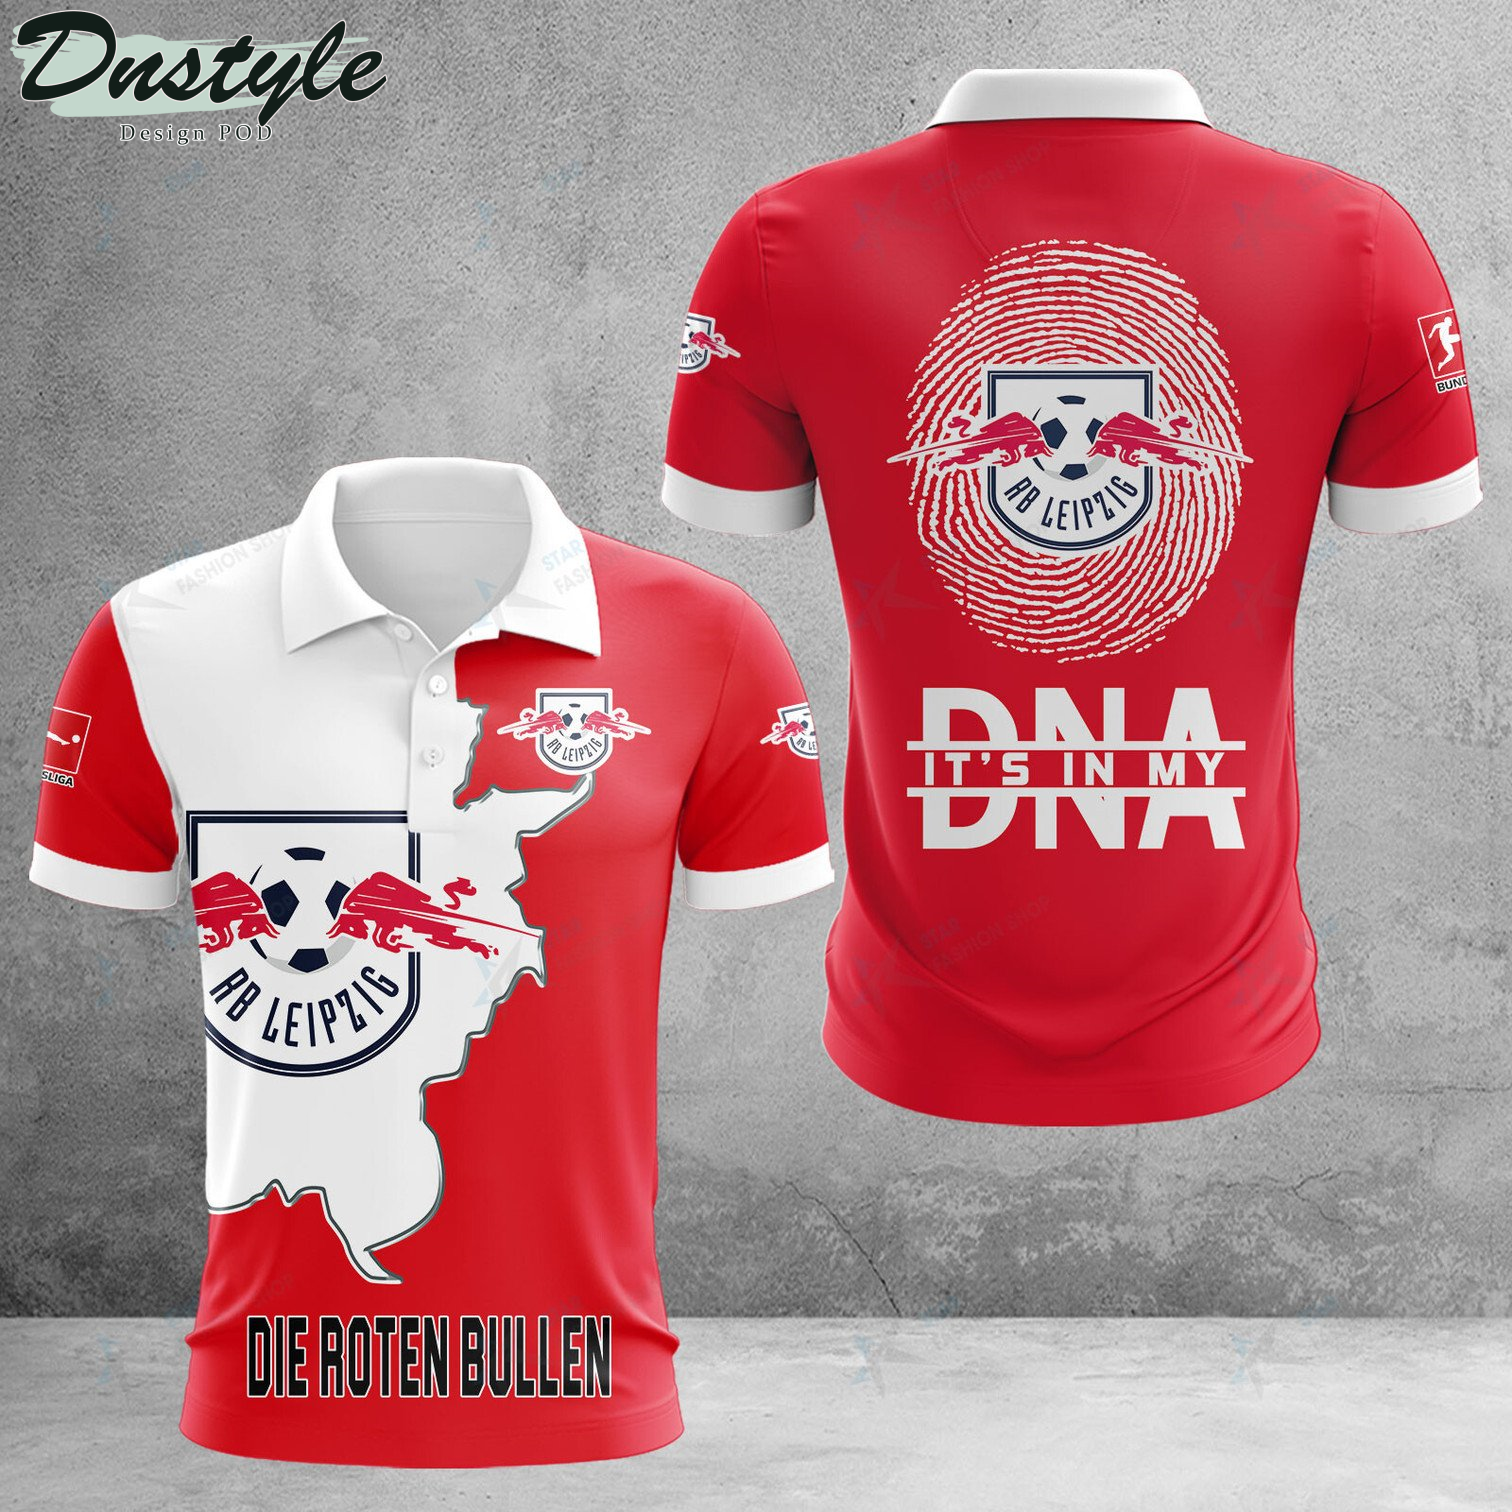 RB Leipzig it's in my DNA polo shirt